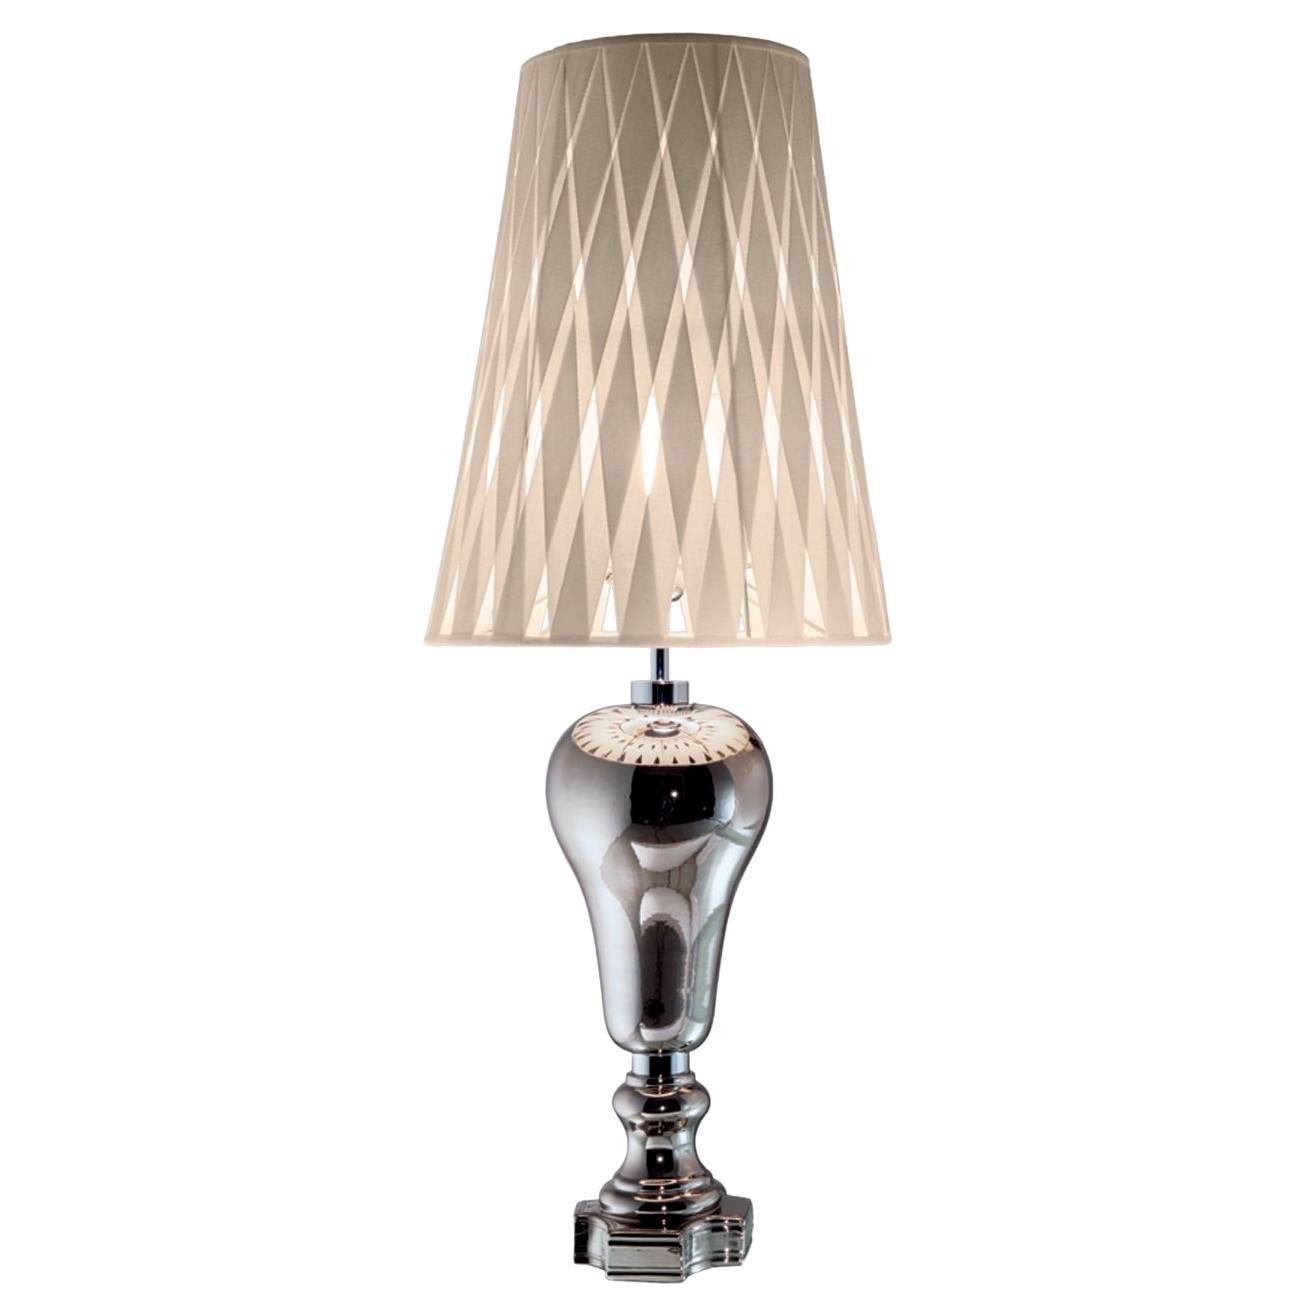 21st Century Ginger and Fred Platinum Ceramic Table Lamp by Patrizia Garganti For Sale